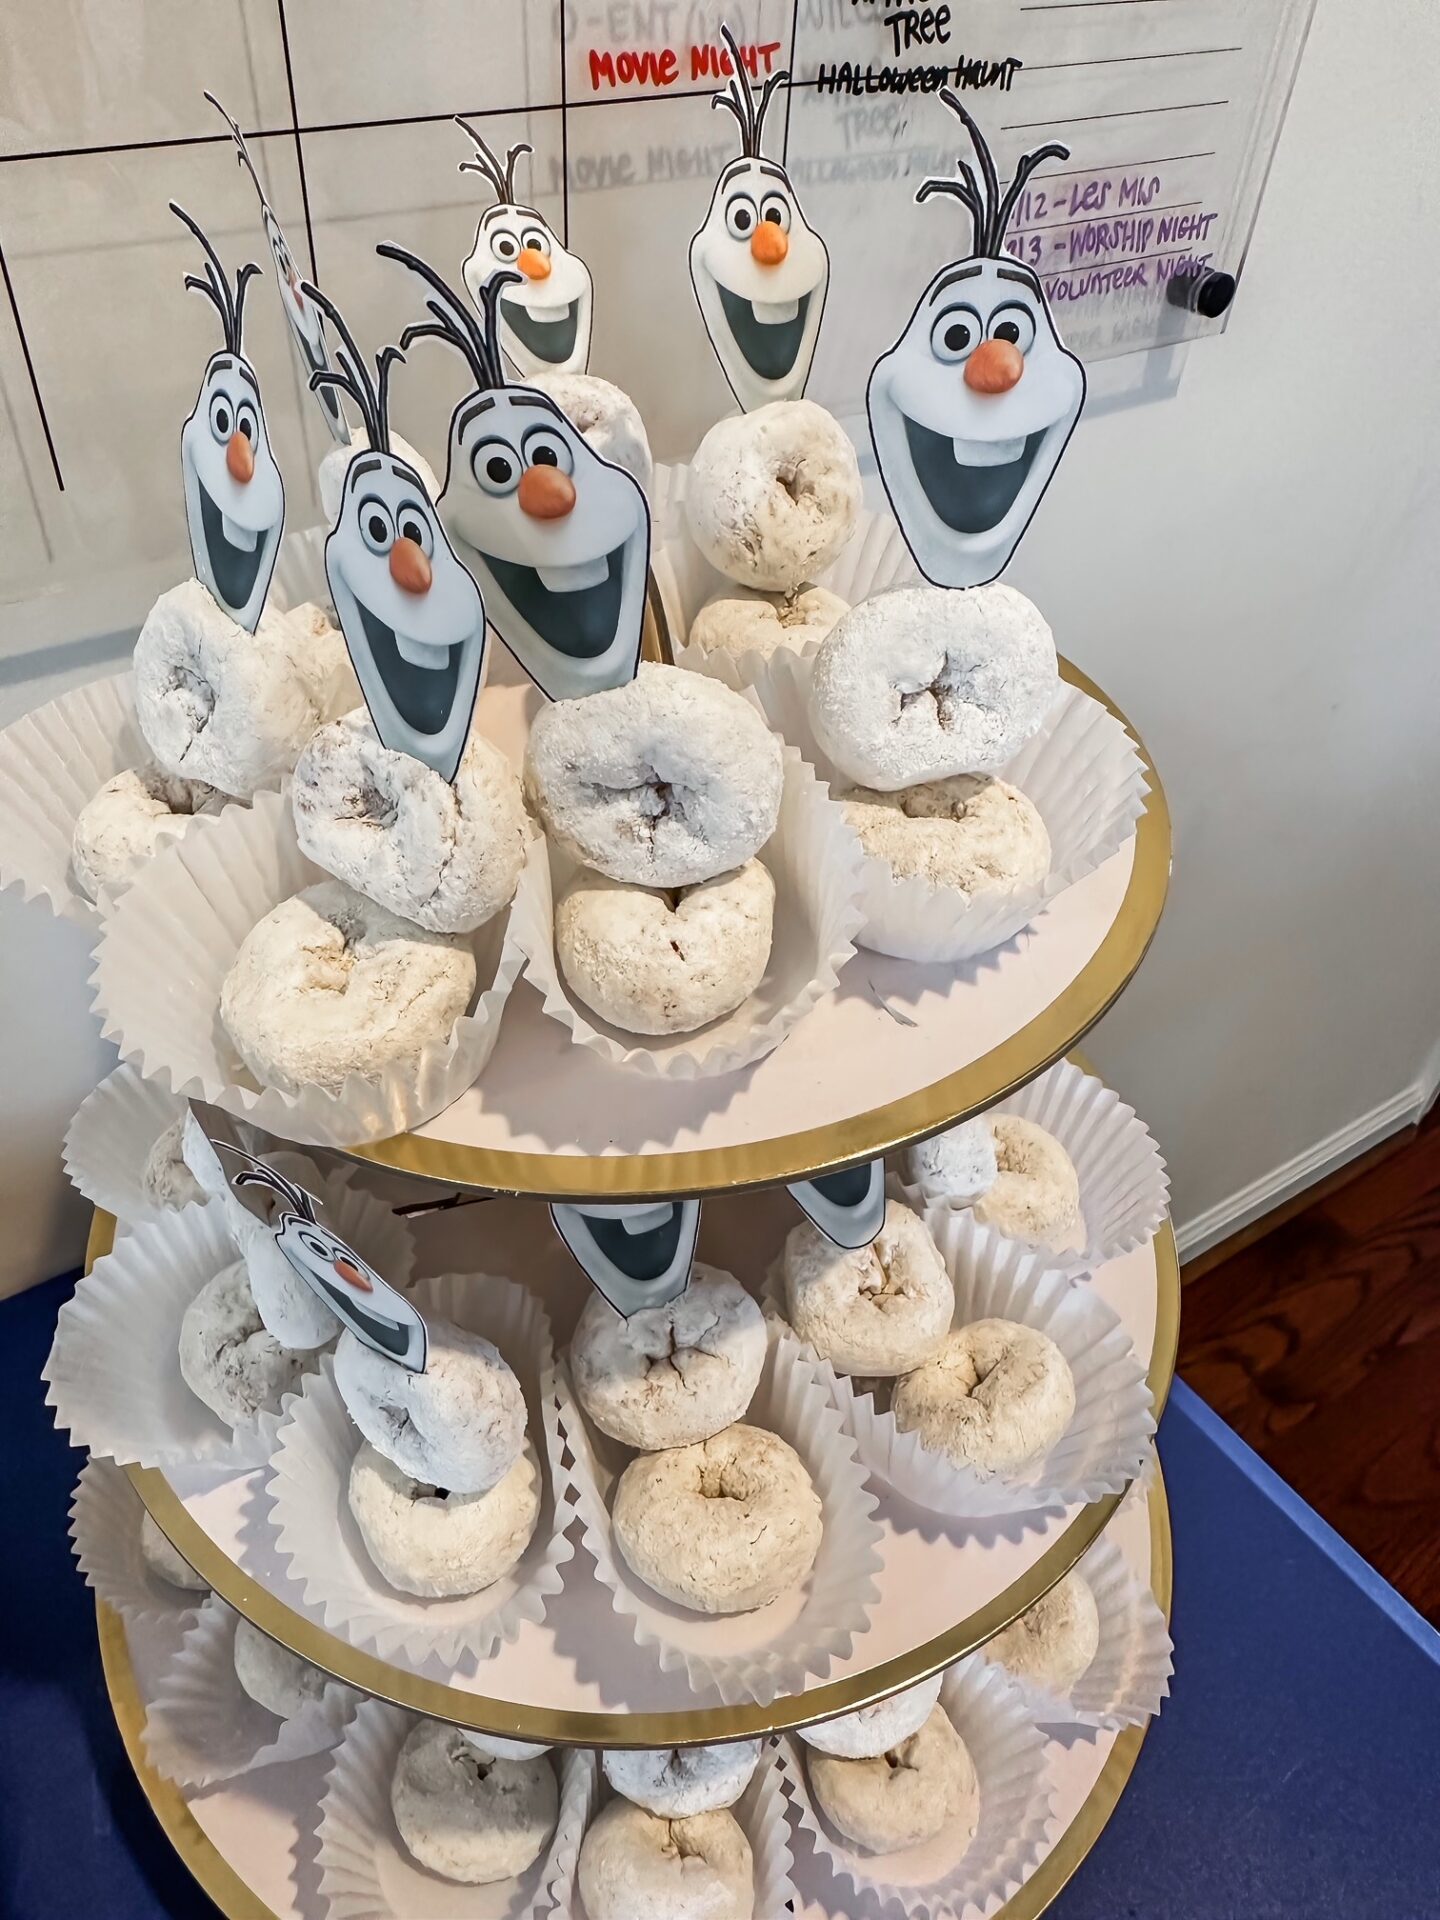 Frozen Birthday Party ideas on Coming Up Roses - Easy Olaf powdered donuts